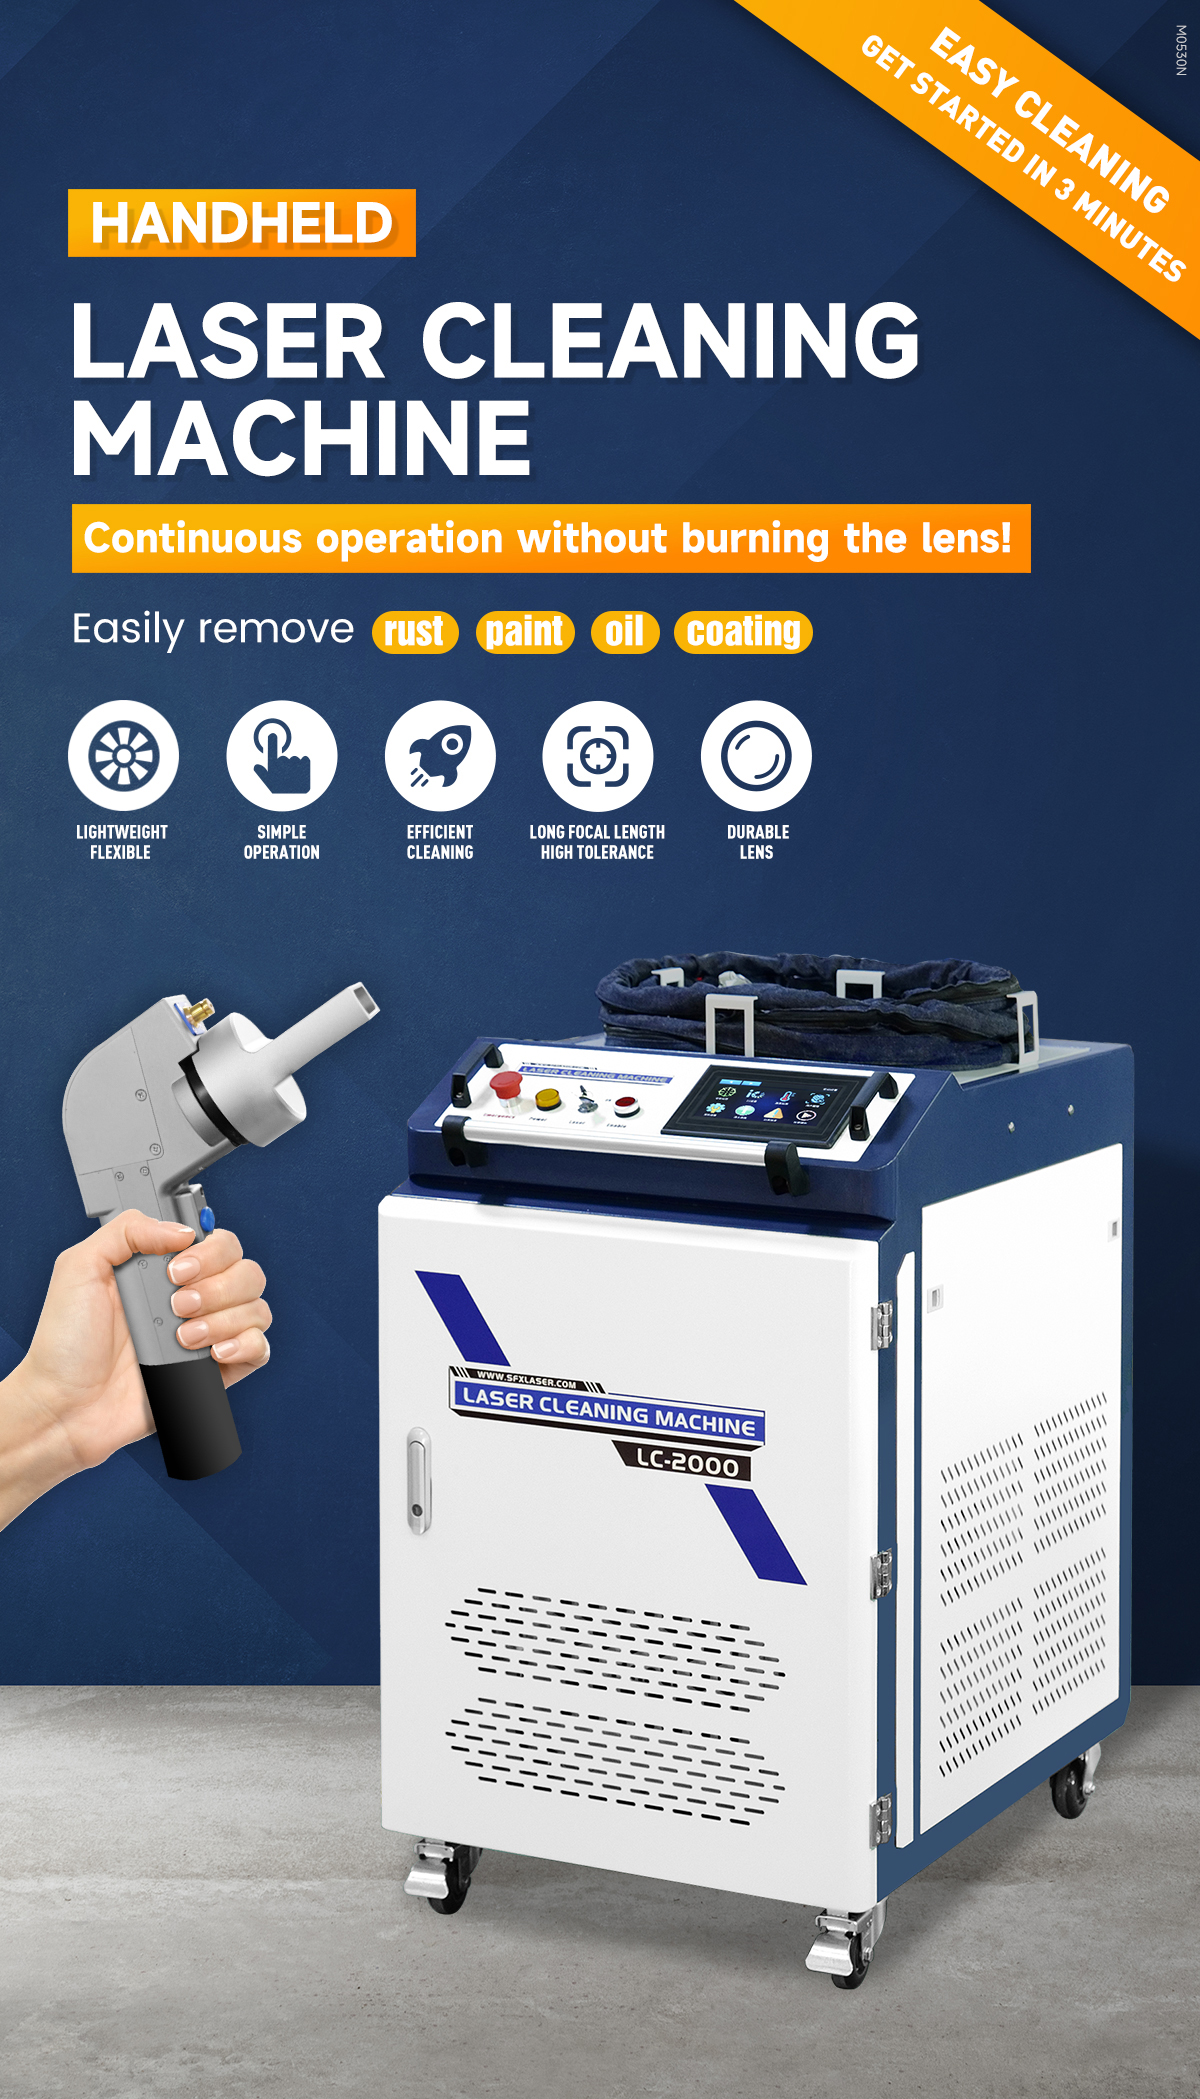 SFX 1000watt JPT Fiber Laser Cleaning Machine Laser Rust/Painting/Oil Removal with High Quality Laser Gun SFX 1000watt JPT Fiber Laser Cleaning Machine Laser Rust/Painting/Oil Removal with High Quality Laser Gun sfx laser,sfx JPT laser cleaning machine,1000w laser cleaning machine,Rust Remover Machine,Painting Remover,Laser Rust Removal,rust removal laser